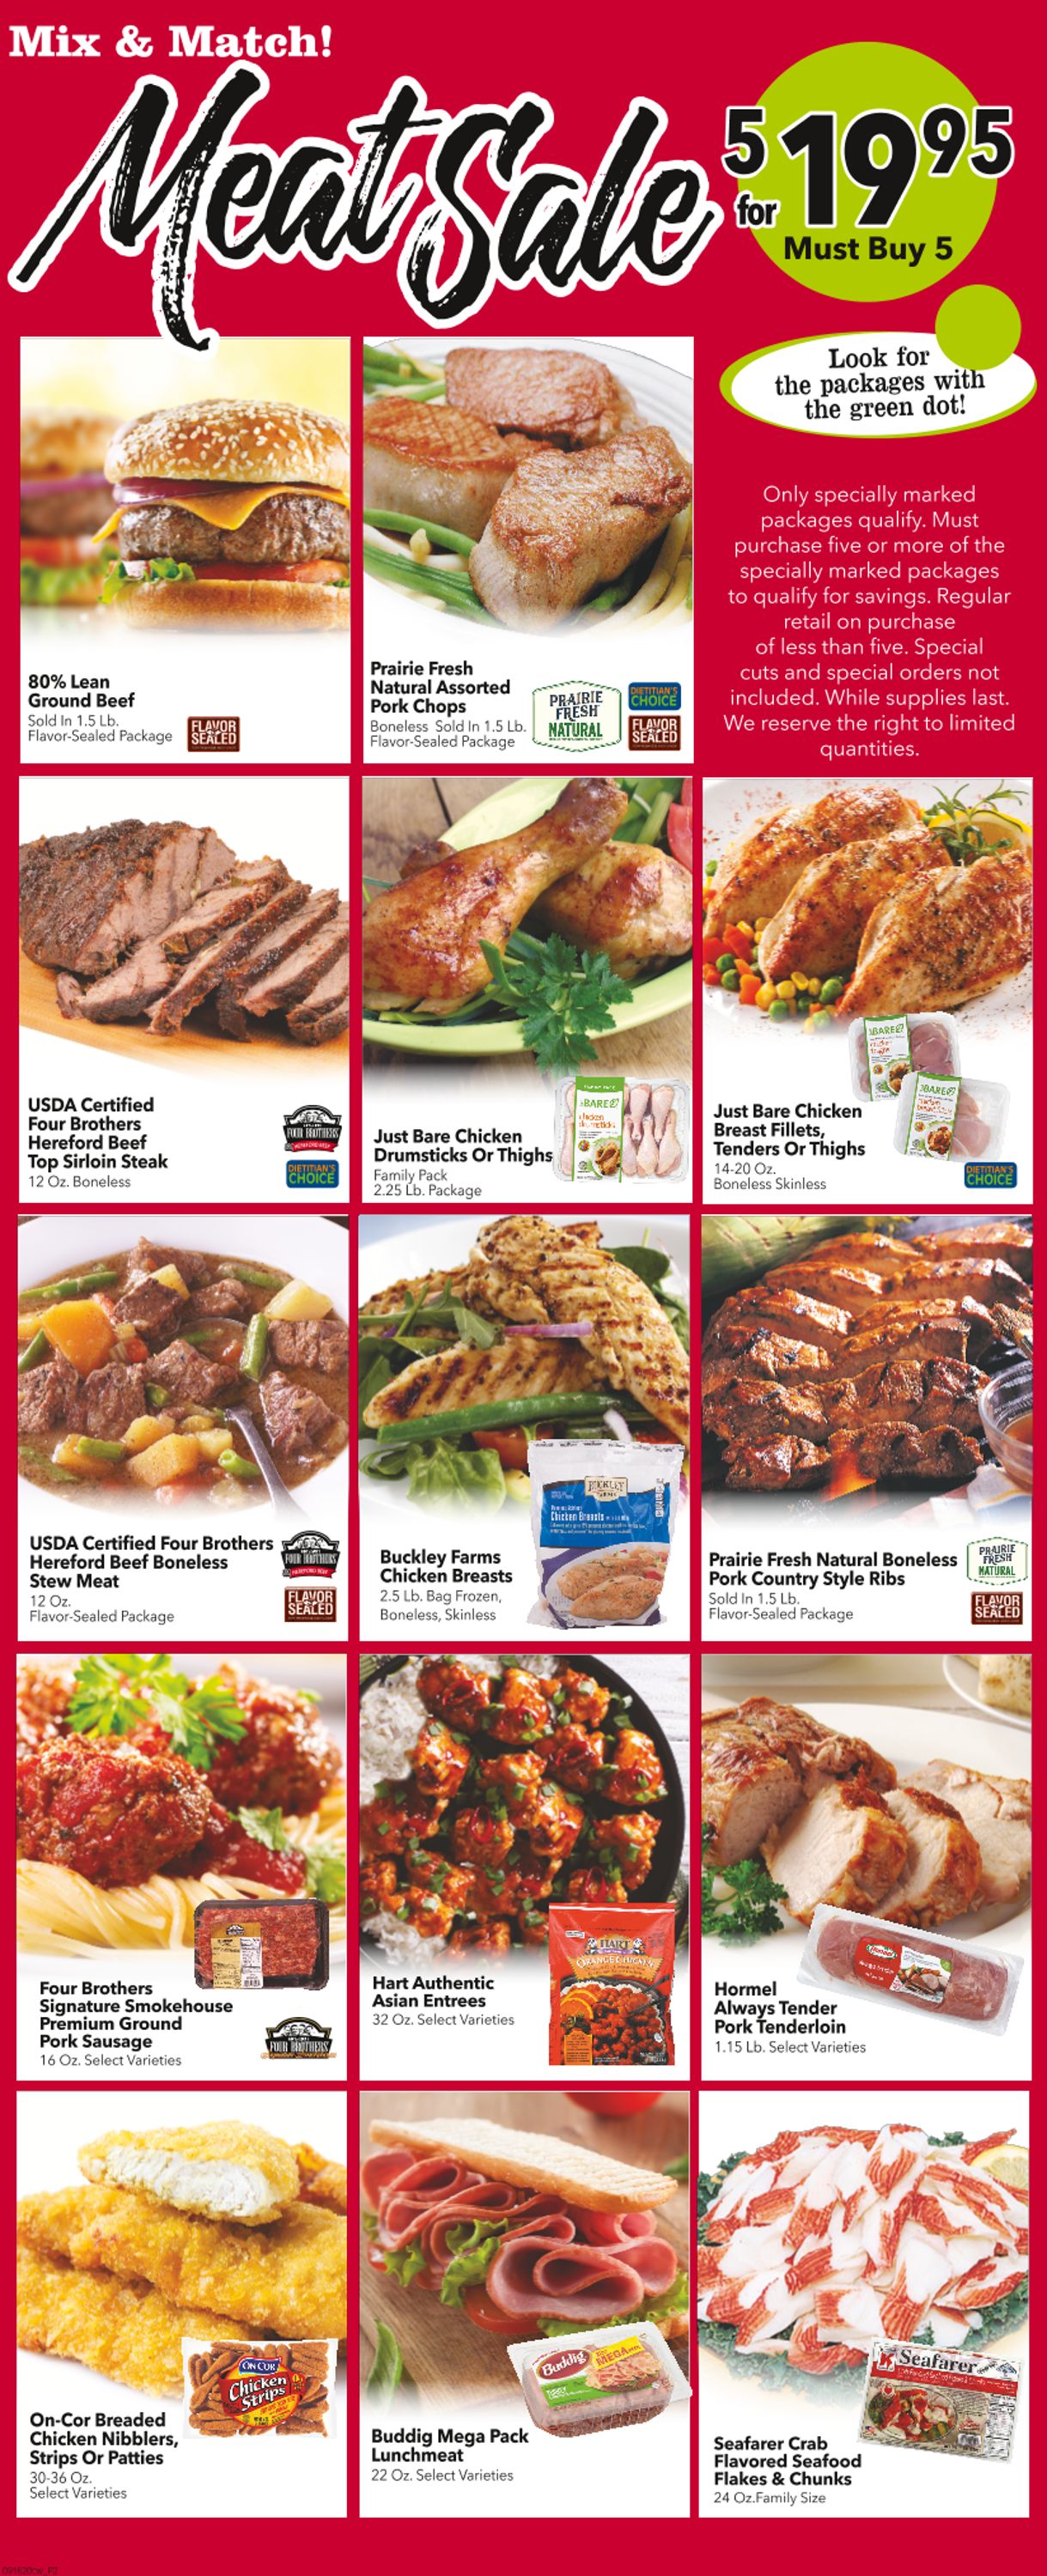 Cash Wise Weekly Ad Circular - valid 09/16-09/22/2020 (Page 2)